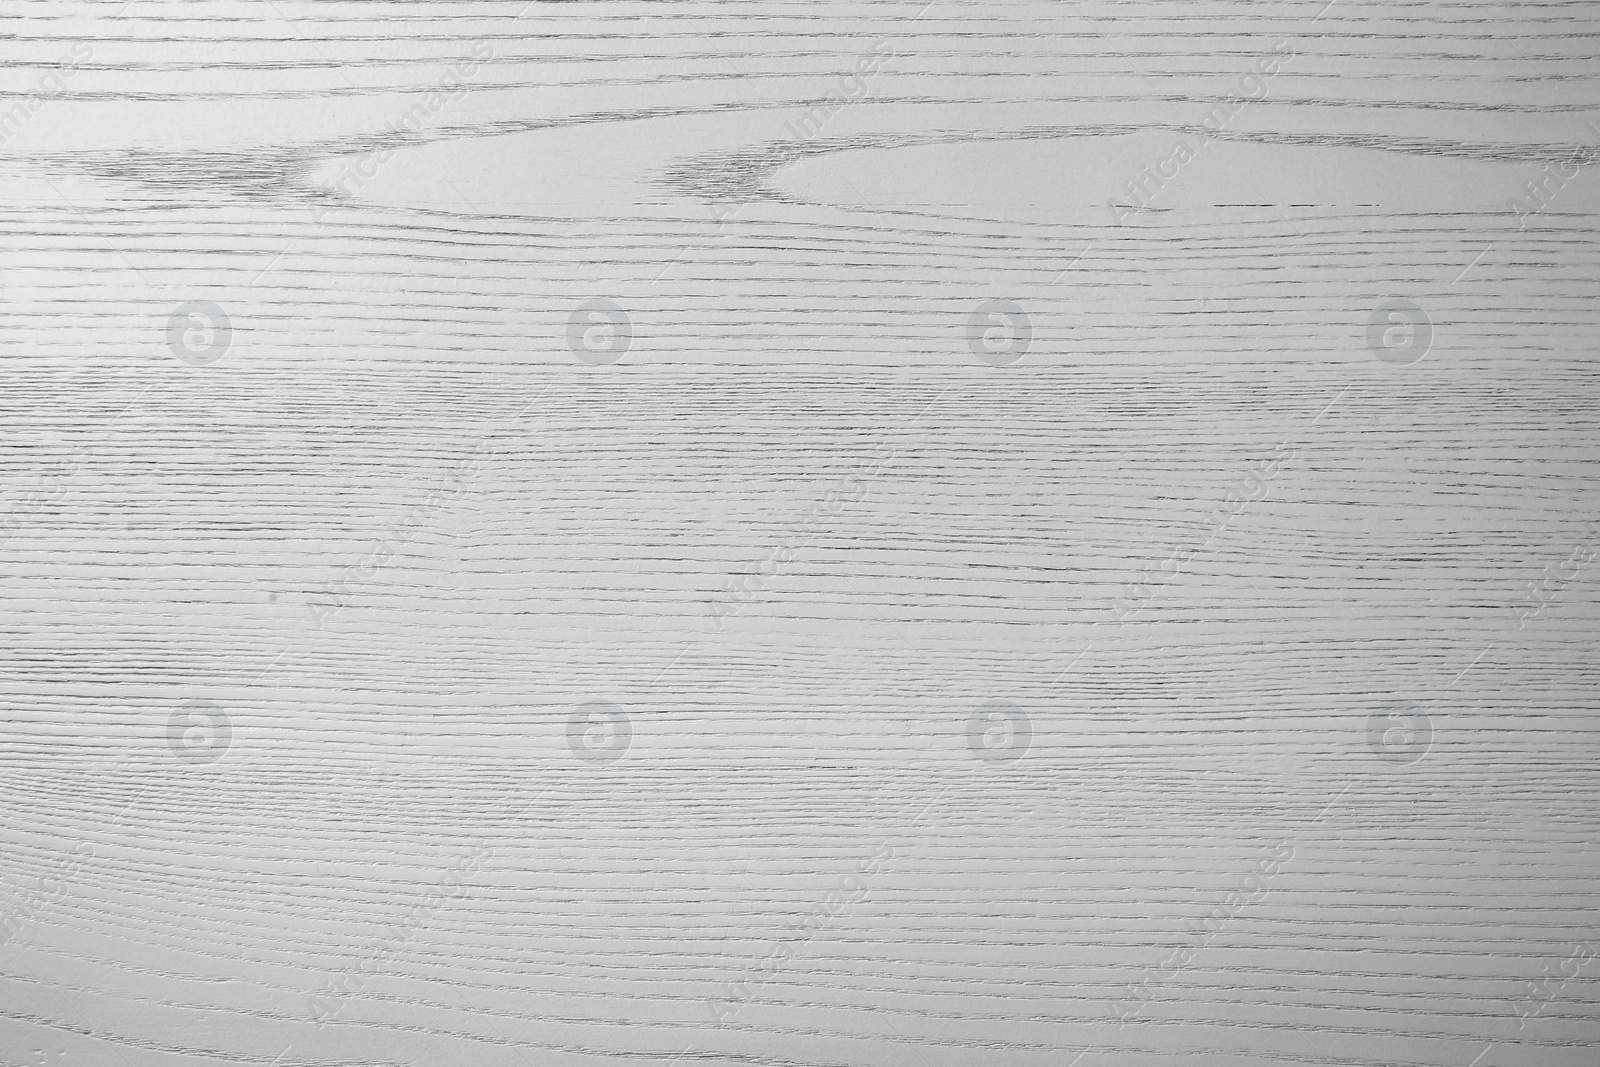 Photo of Texture of white wooden surface as background, close up